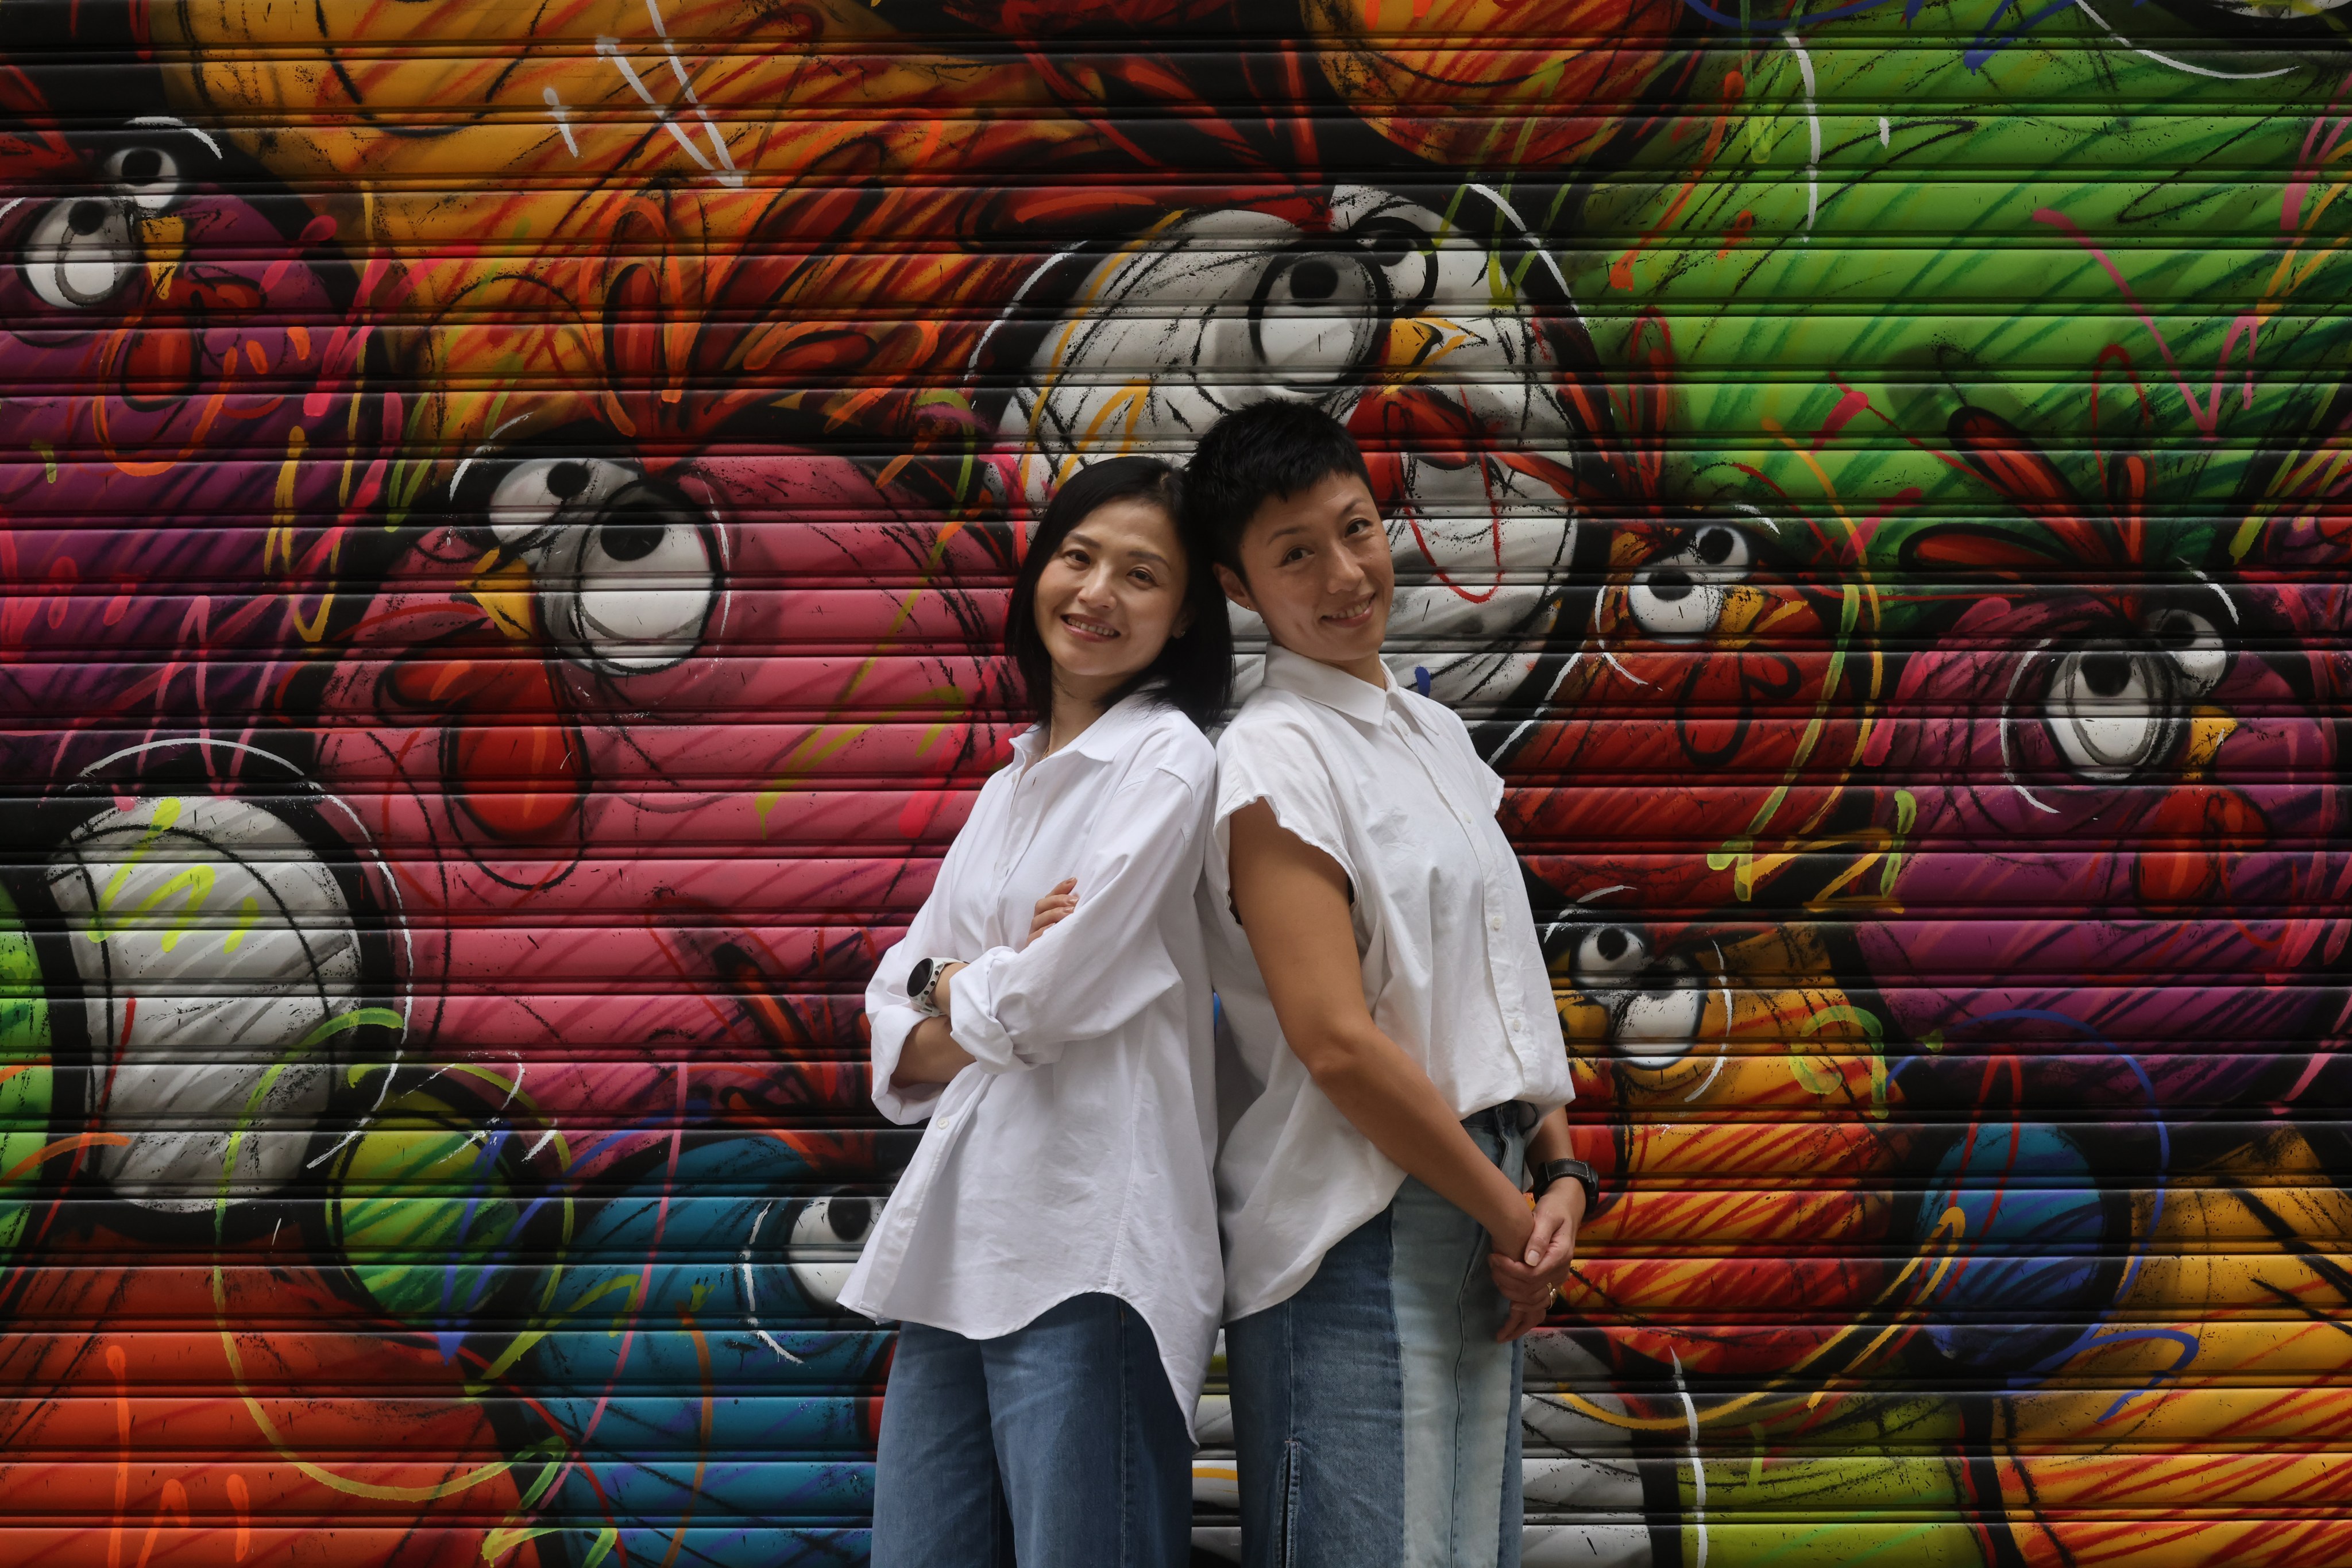 Vivian Ho (left) and Jamie Cheung in Sheung Wan, Hong Kong. They endured cancer together during the pandemic, and their journey highlights the importance of support for cancer patients during global health emergencies. Photo: Jonathan Wong